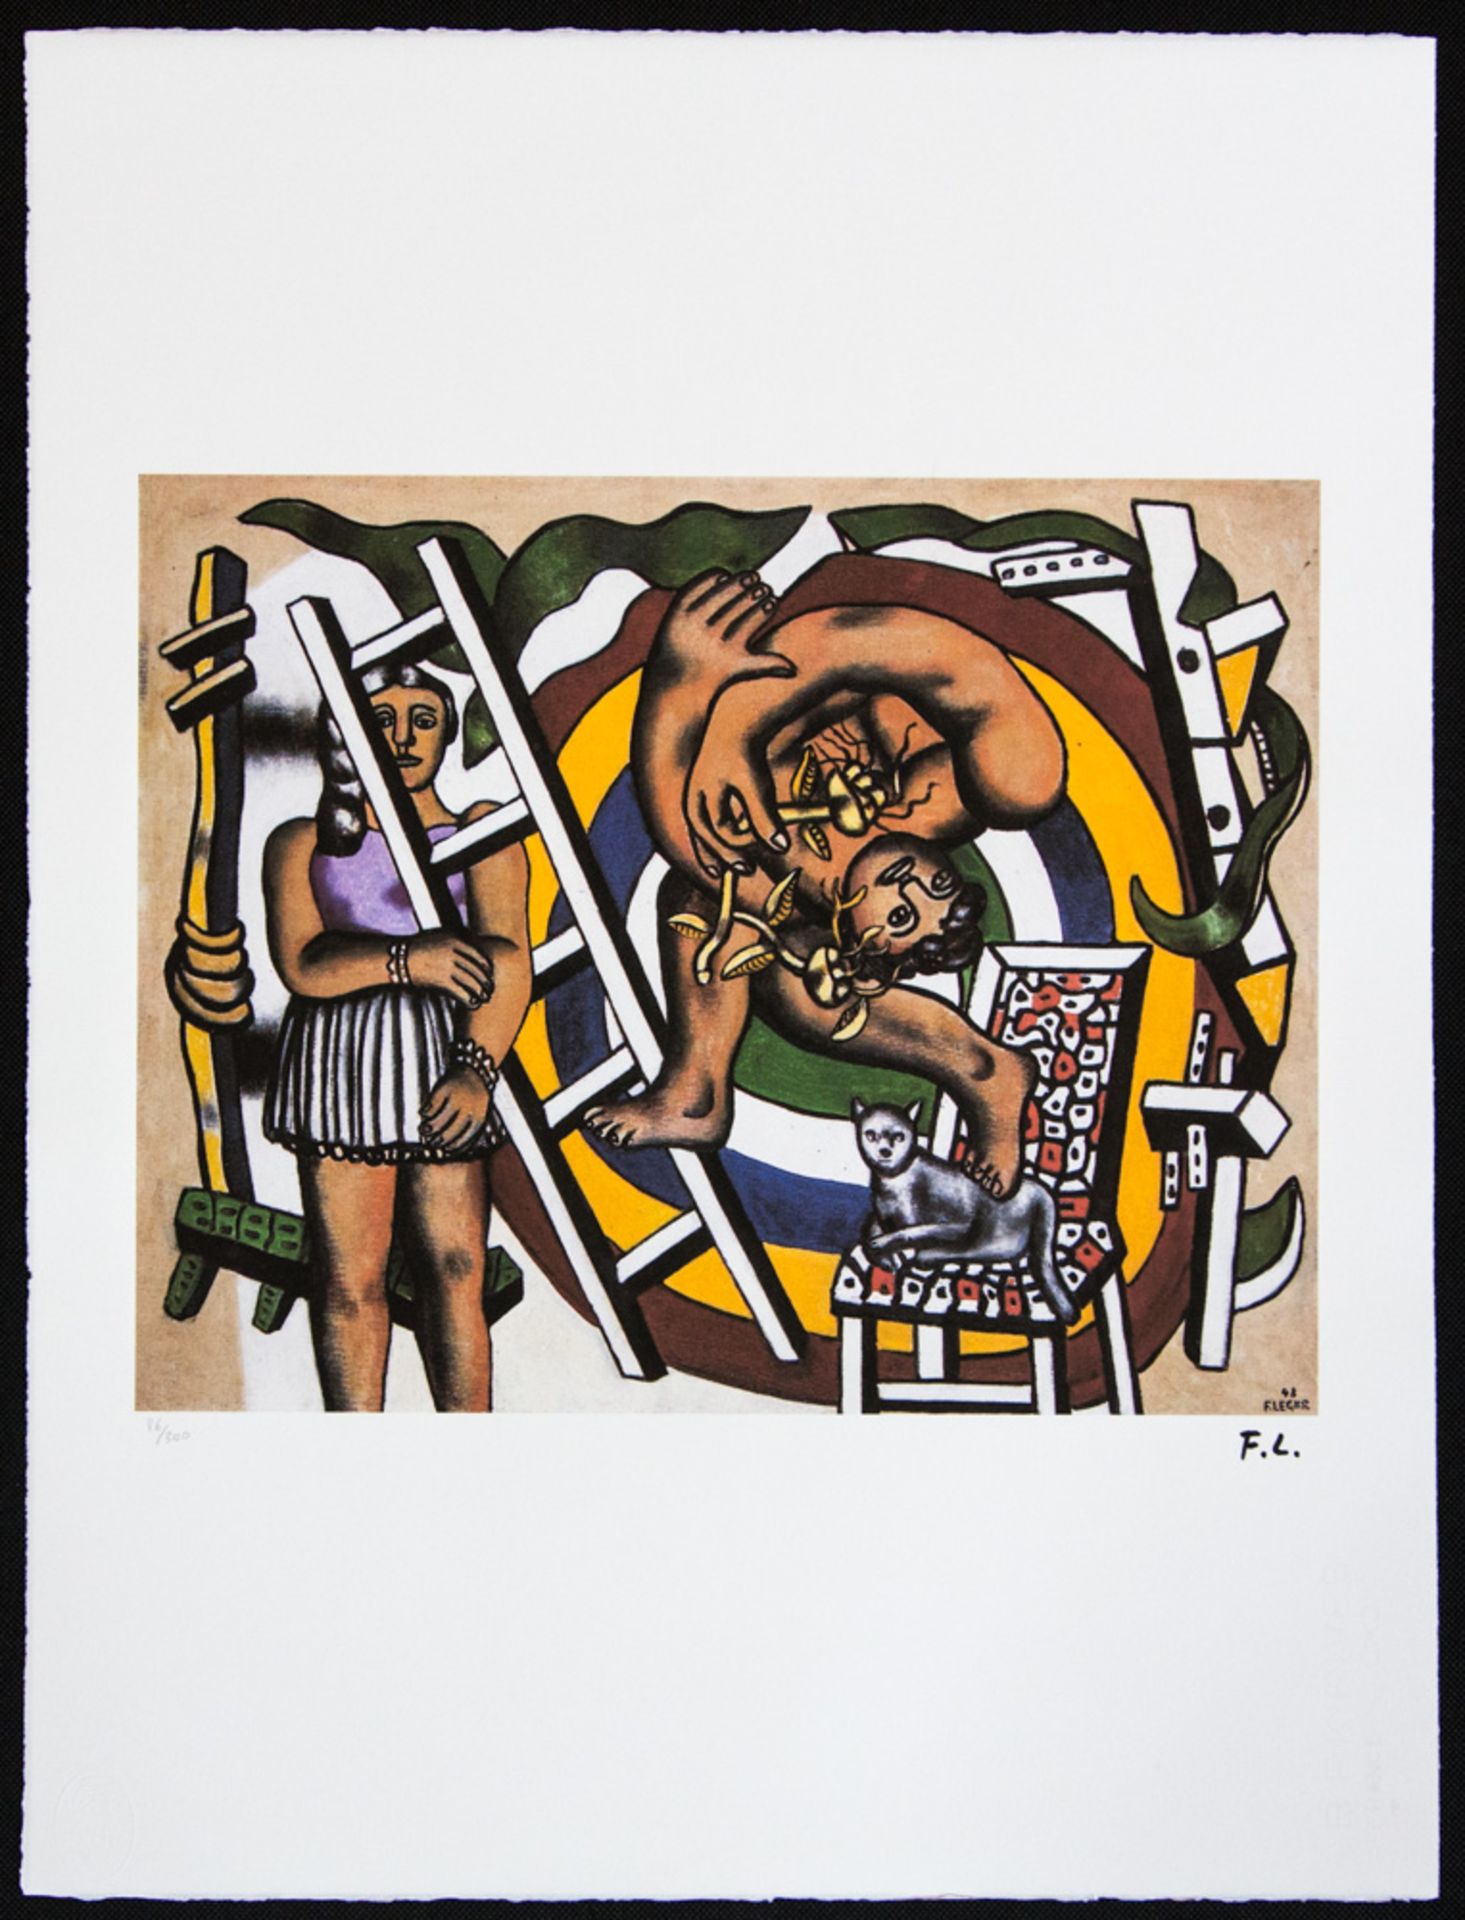 Fernand Leger 'The Acrobat And His Partner' - Image 2 of 5